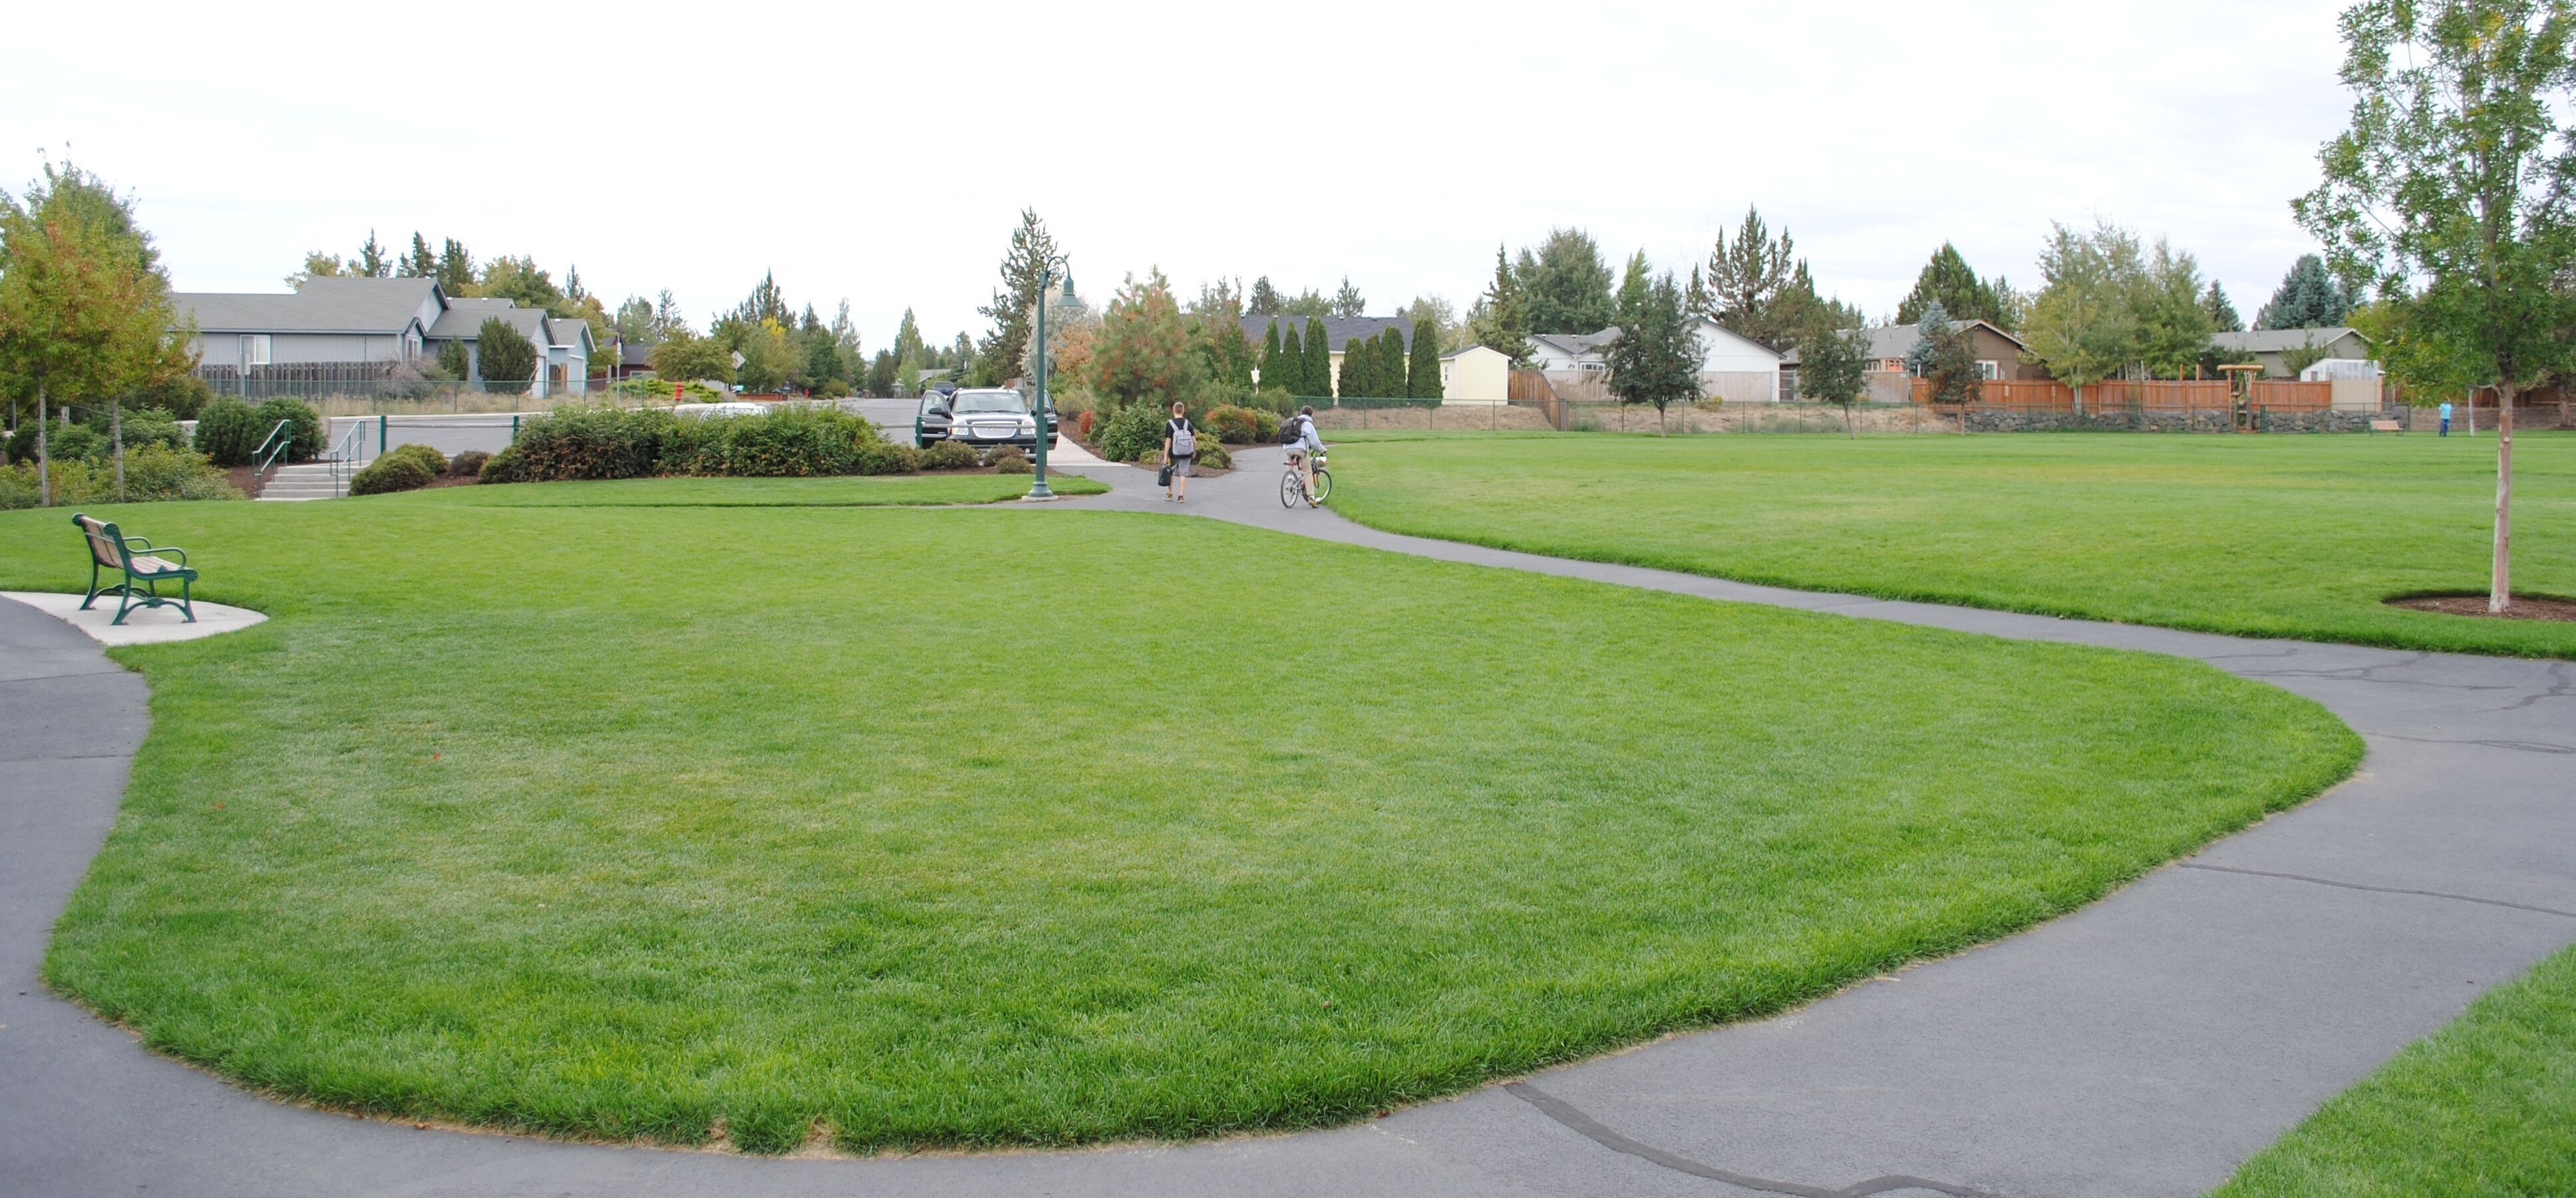 Mountain View Park lawn and trails